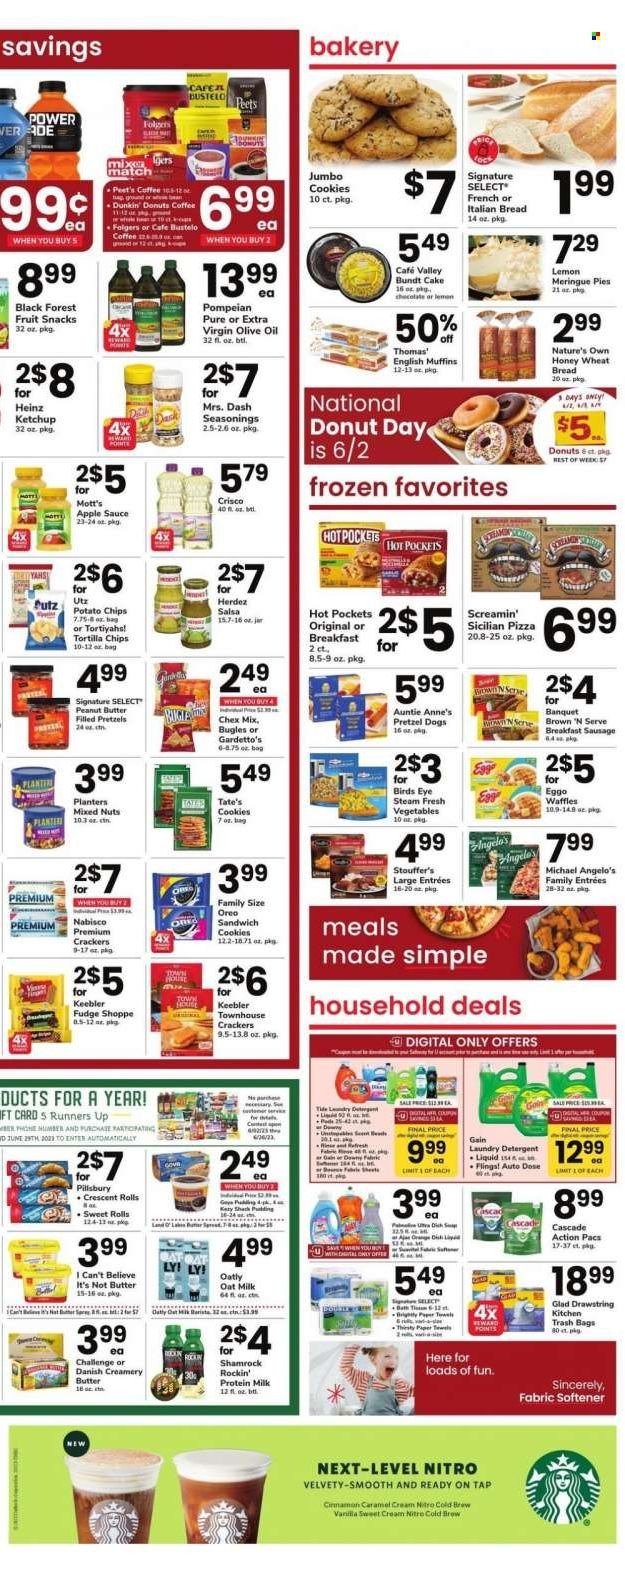 thumbnail - Safeway Flyer - 06/02/2023 - 06/08/2023 - Sales products - english muffins, wheat bread, pretzels, cake, pie, bundt, crescent rolls, waffles, Dunkin' Donuts, sweet rolls, oranges, Mott's, hot pocket, pizza, sauce, Pillsbury, Bird's Eye, ready meal, sausage, Brown 'N Serve, pudding, oat milk, I Can't Believe It's Not Butter, sandwich cookies, Stouffer's, Screamin' Sicilian, cookies, fudge, crackers, fruit snack, Keebler, Nabisco, tortilla chips, potato chips, Chex Mix, Crisco, Heinz, cinnamon, caramel, ketchup, salsa, extra virgin olive oil, olive oil, oil, apple sauce, peanut butter, mixed nuts, Planters, coffee, Folgers, detergent, Cascade, Tide, fabric softener, laundry detergent, Downy Laundry, dishwasher tablets, trash bags, paper, plant pot, Nature's Own, Bayer. Page 4.